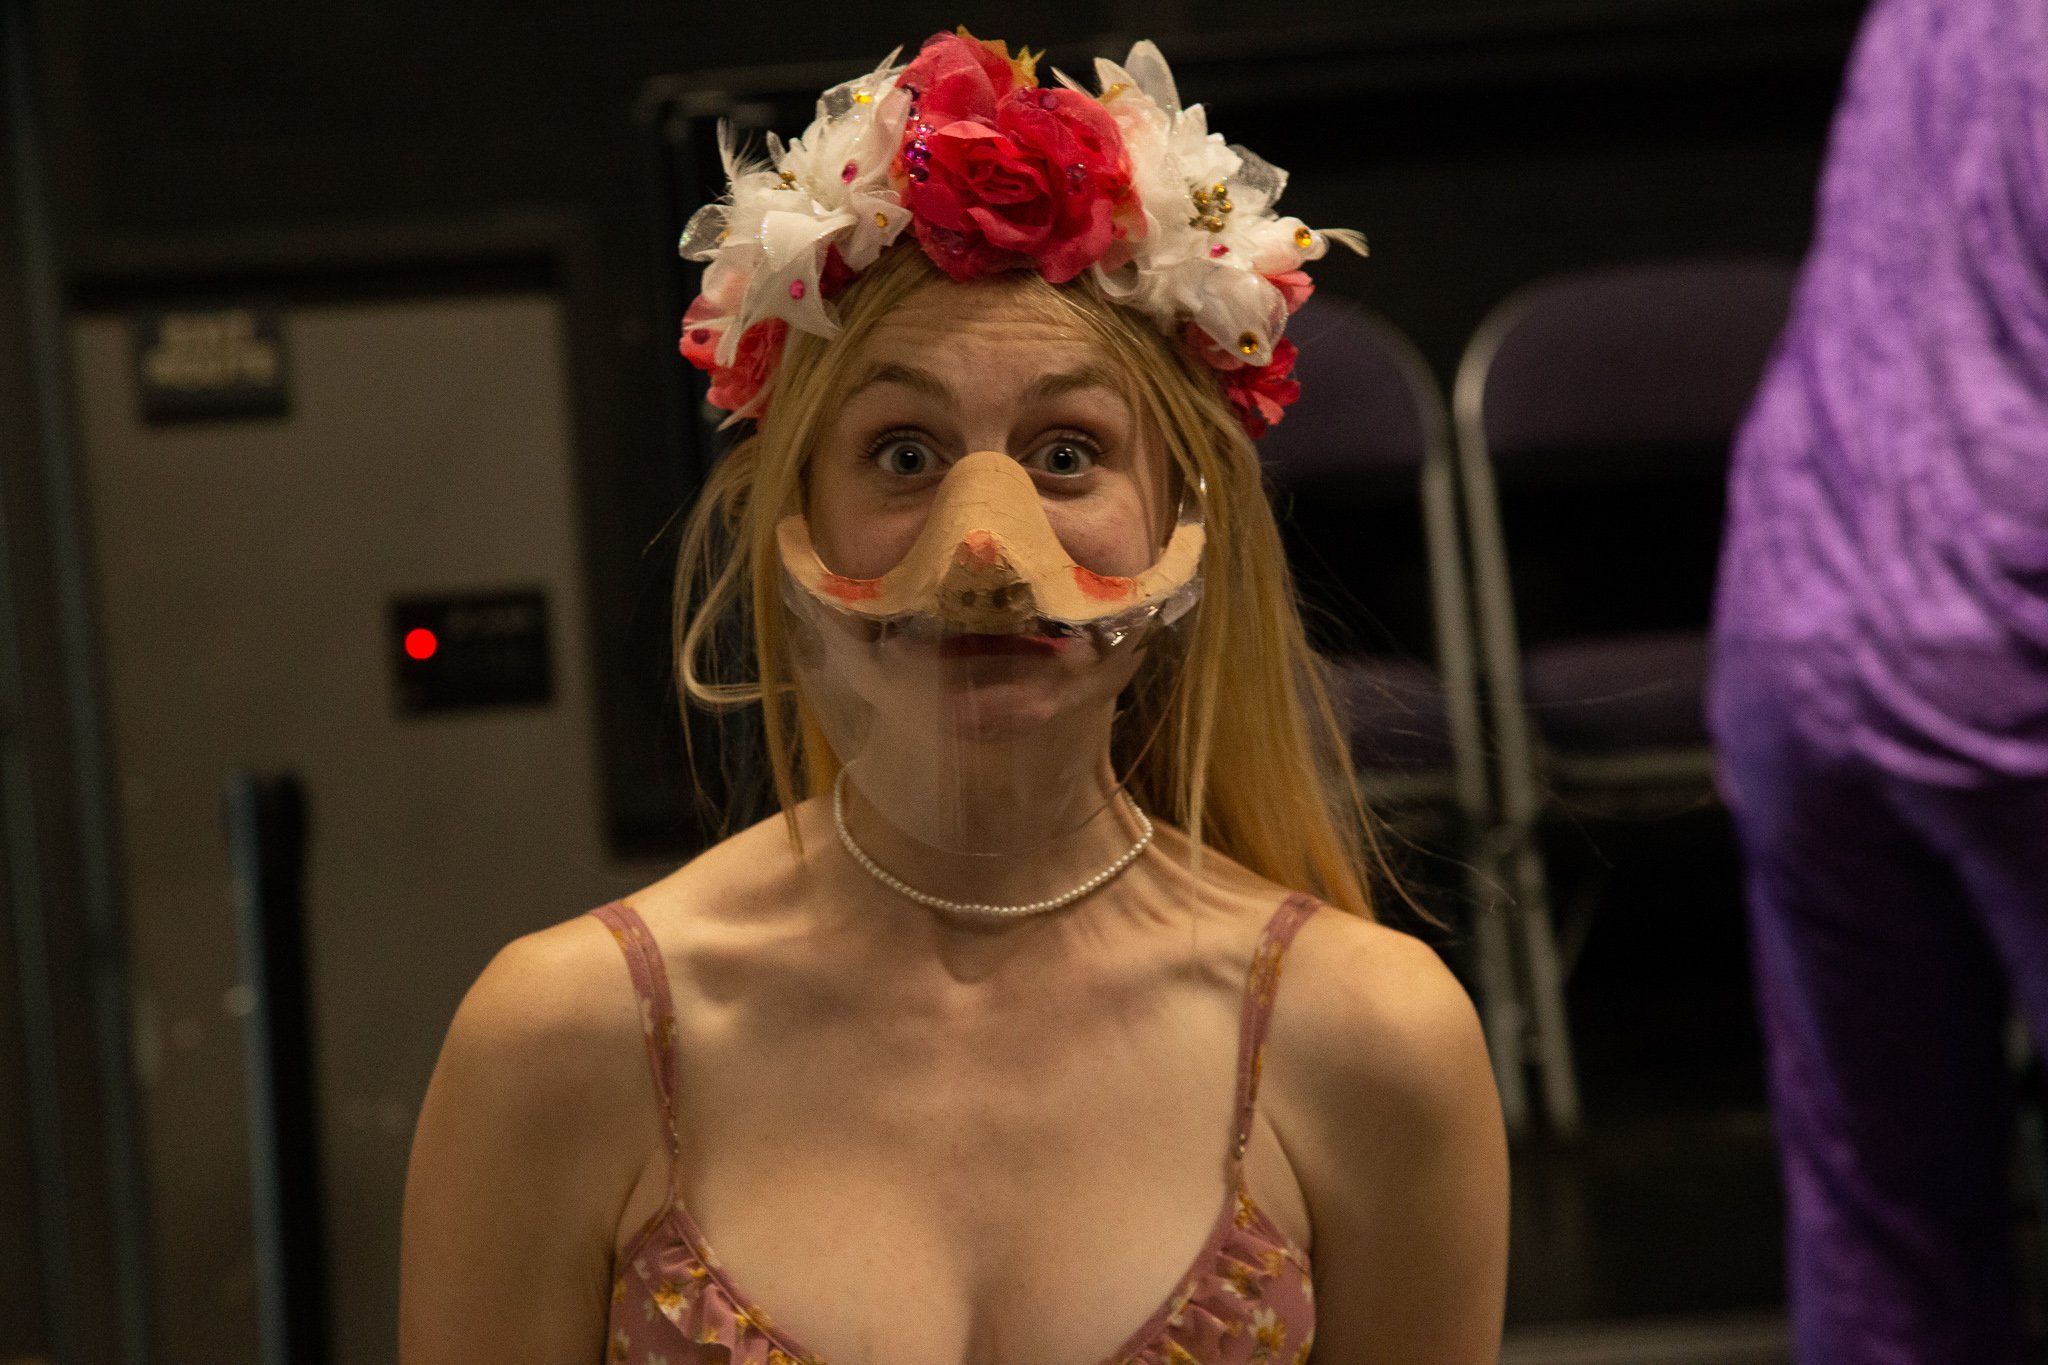  Allie Jenson poses for a picture at Santa Monica college in Santa Monica, California after seeing a camera, while getting ready for a pop up performance on May 24, 2022.  This pop up performance is a mid term test in a comedy class in the theater ar